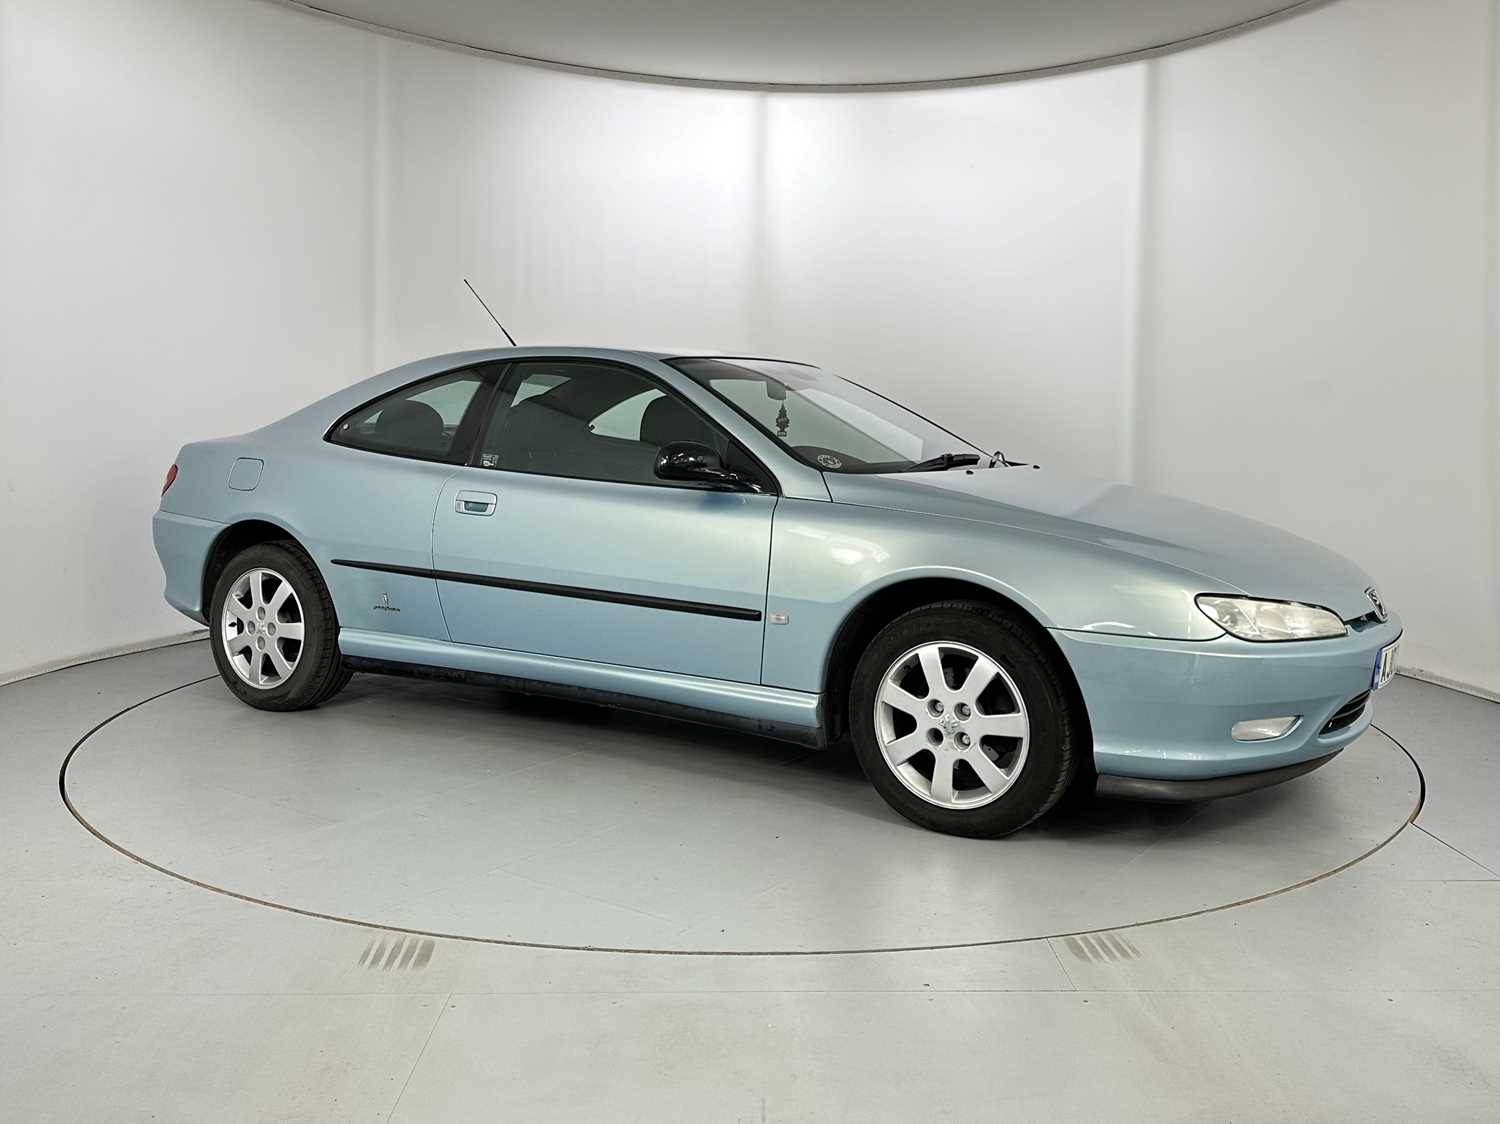 2002 Peugeot 406 Coupe - Image 12 of 28